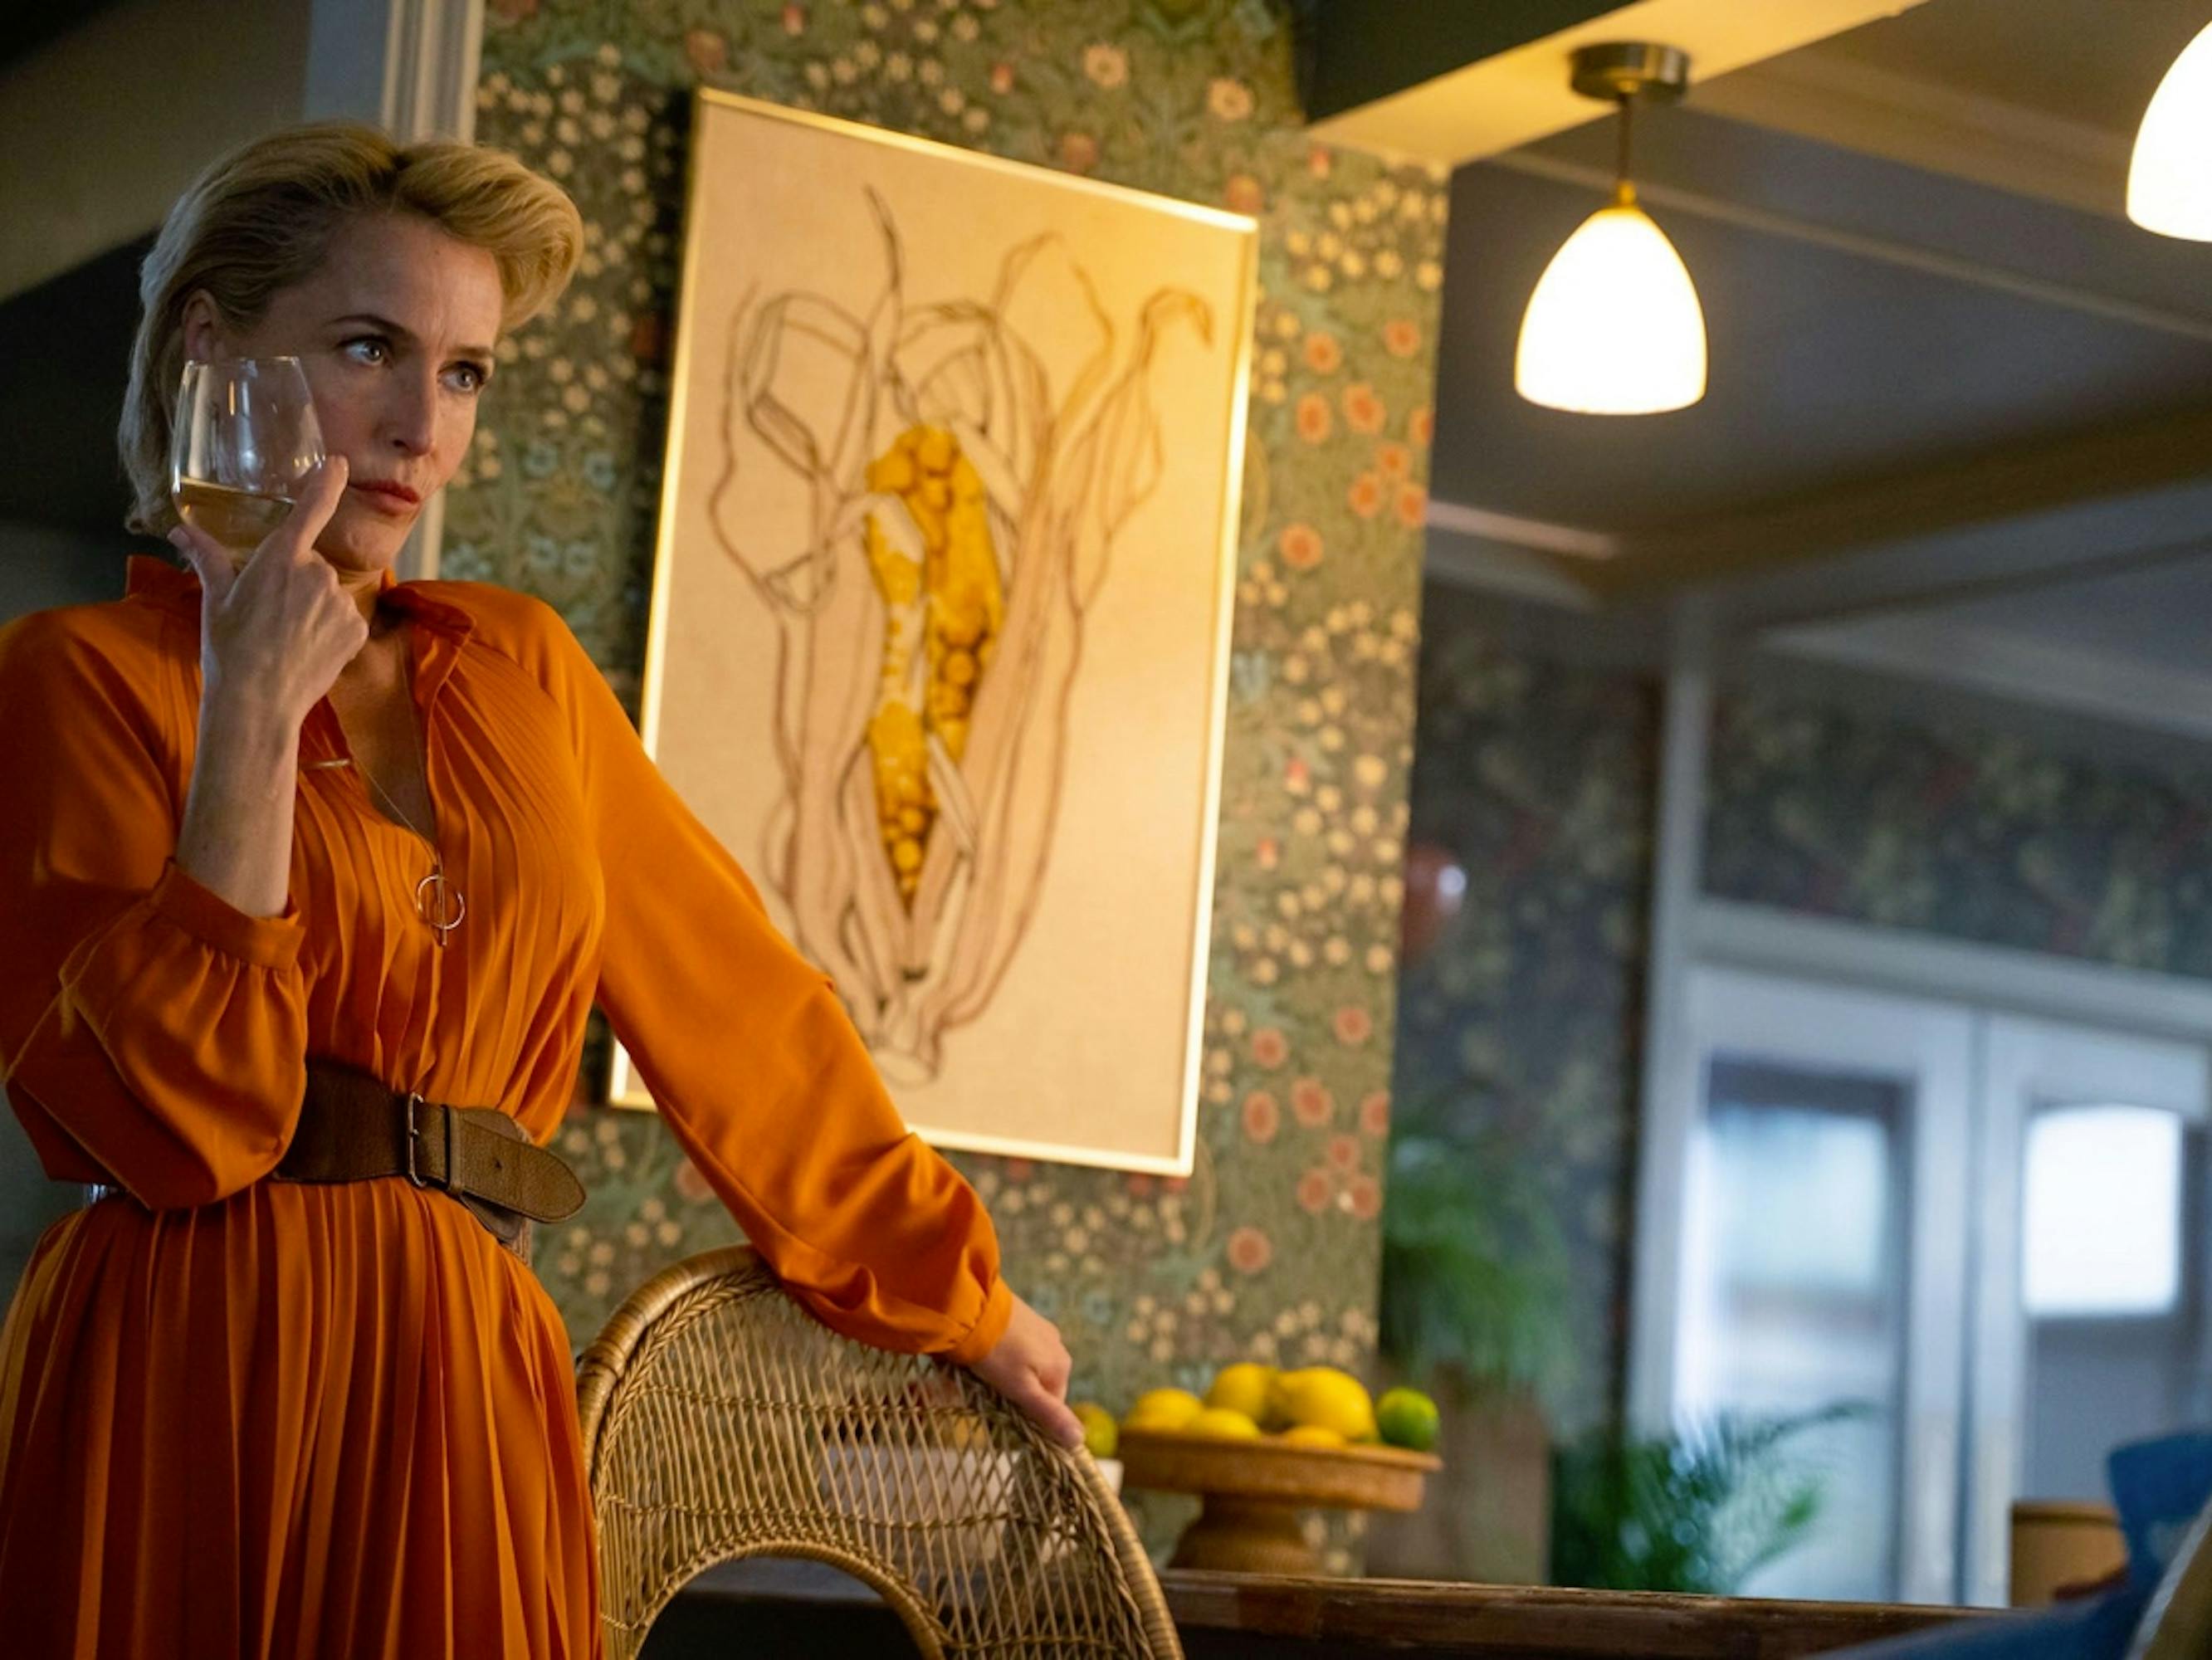 Jean Milburn (Gillian Anderson) presses a glass of chardonnay to her face as she stands in her kitchen. The walls featured a flowery wallpaper, and there is a hanging painting that closely resembles a vagina.